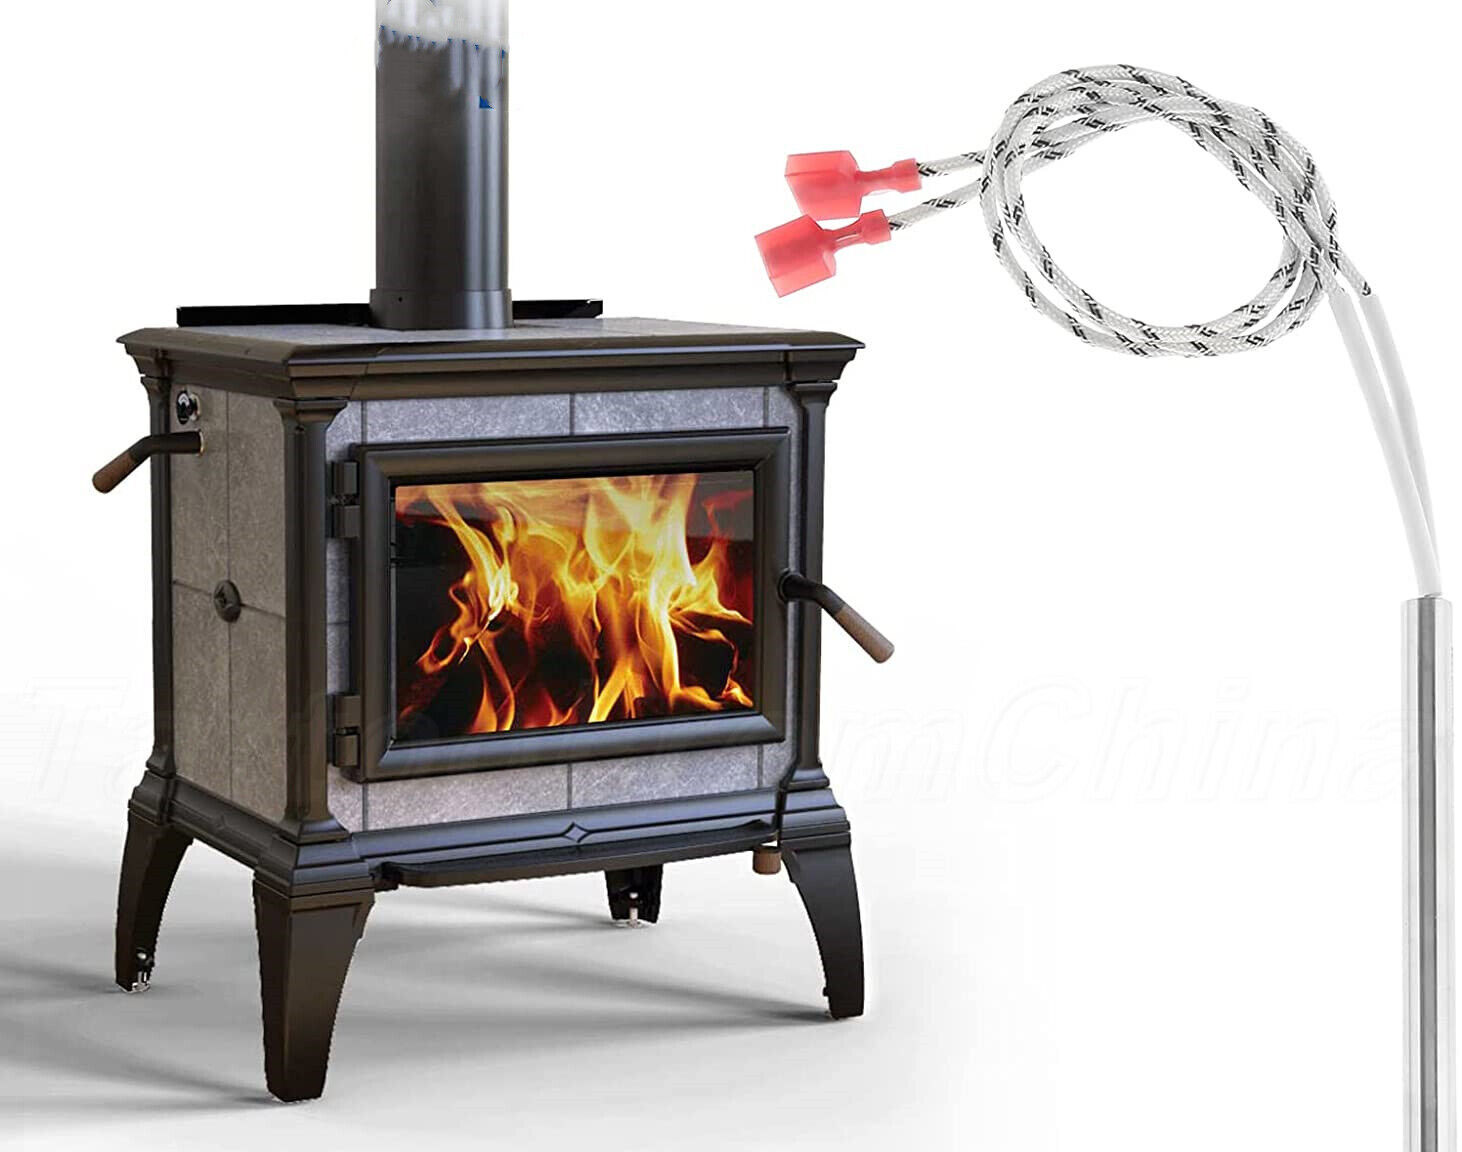 Do pellet stove igniters wear out?